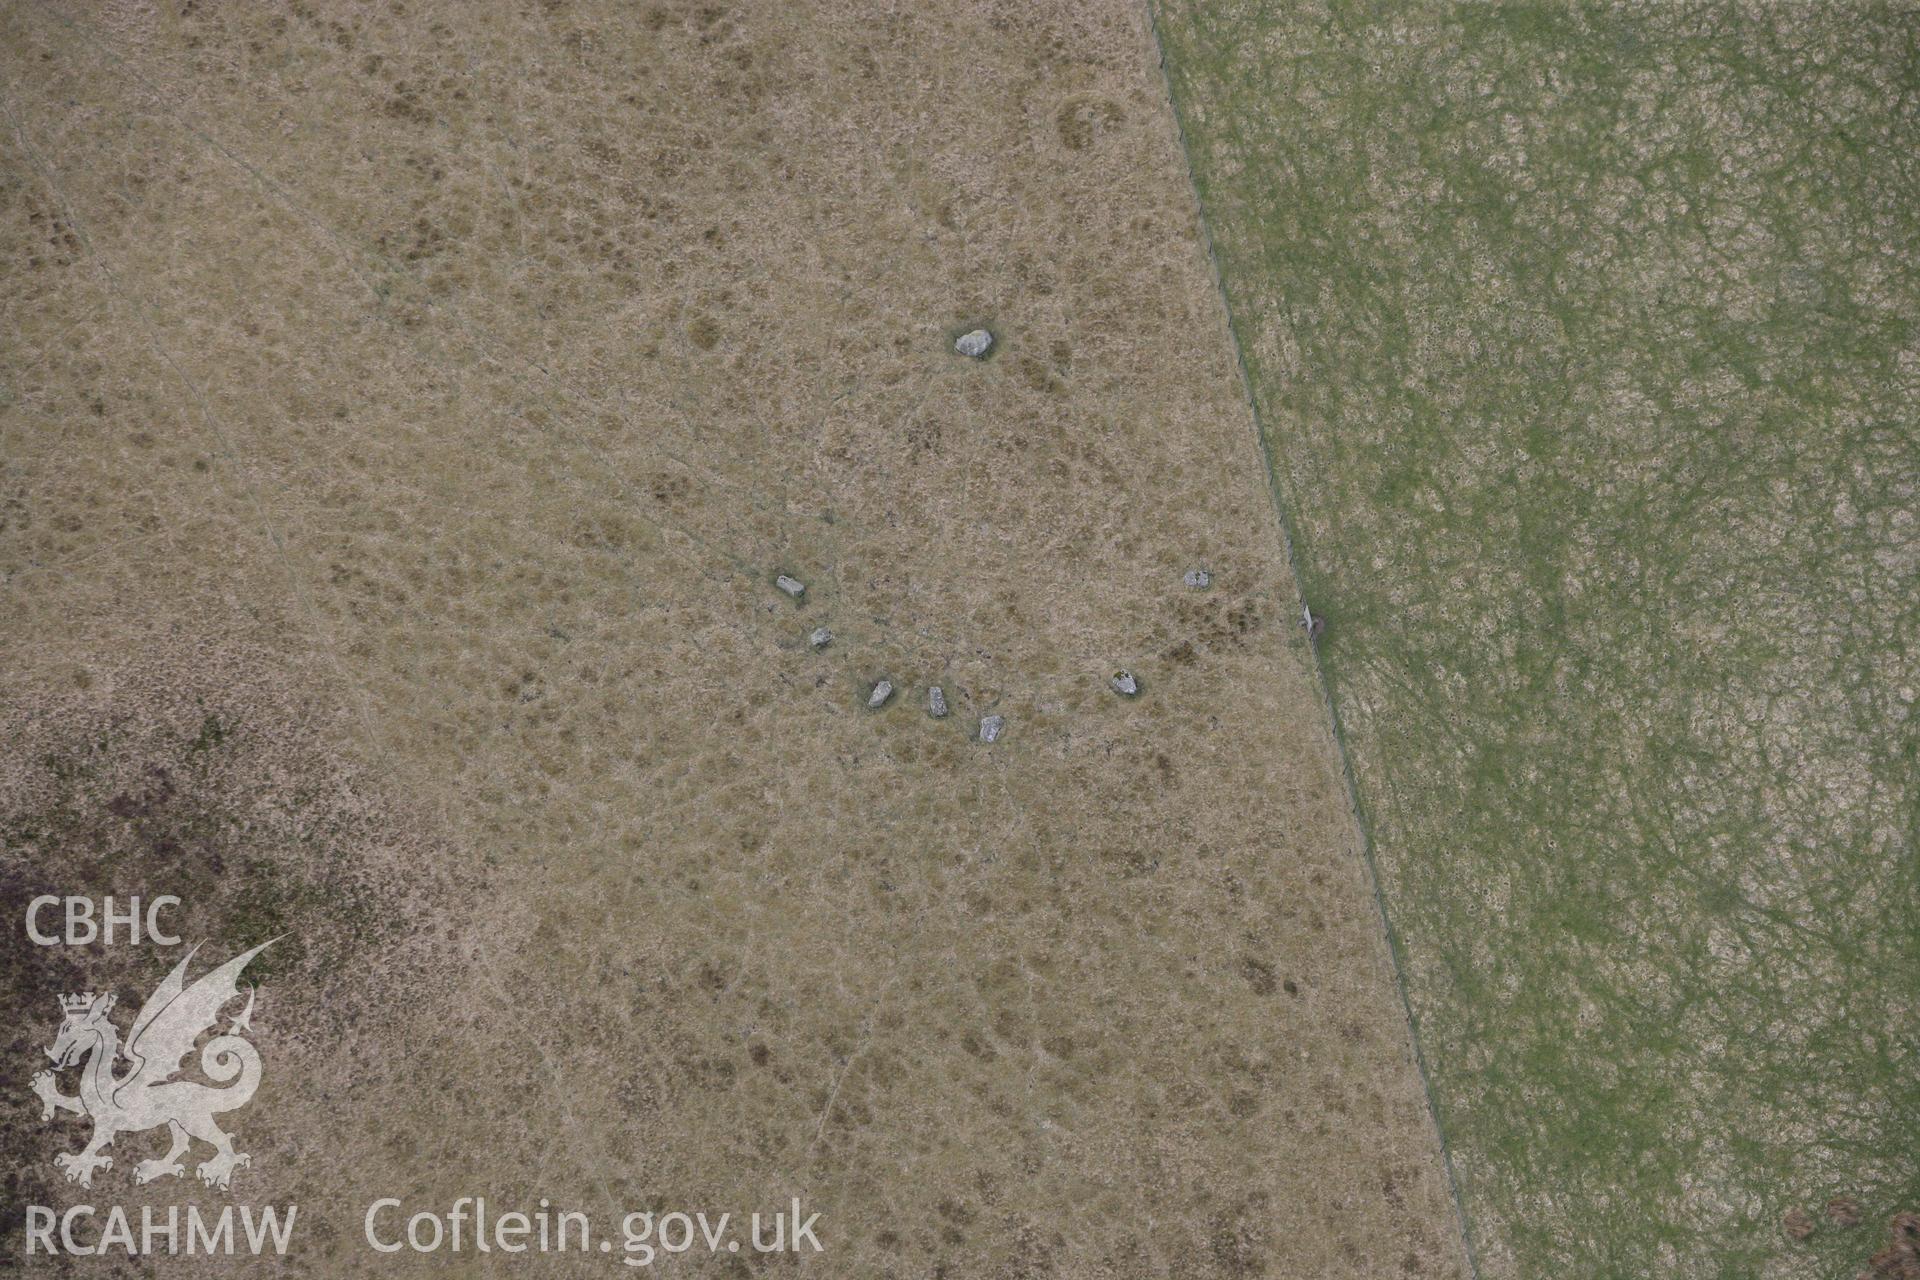 RCAHMW colour oblique photograph of Cerrig Gaerau stone circle. Taken by Toby Driver on 22/03/2011.